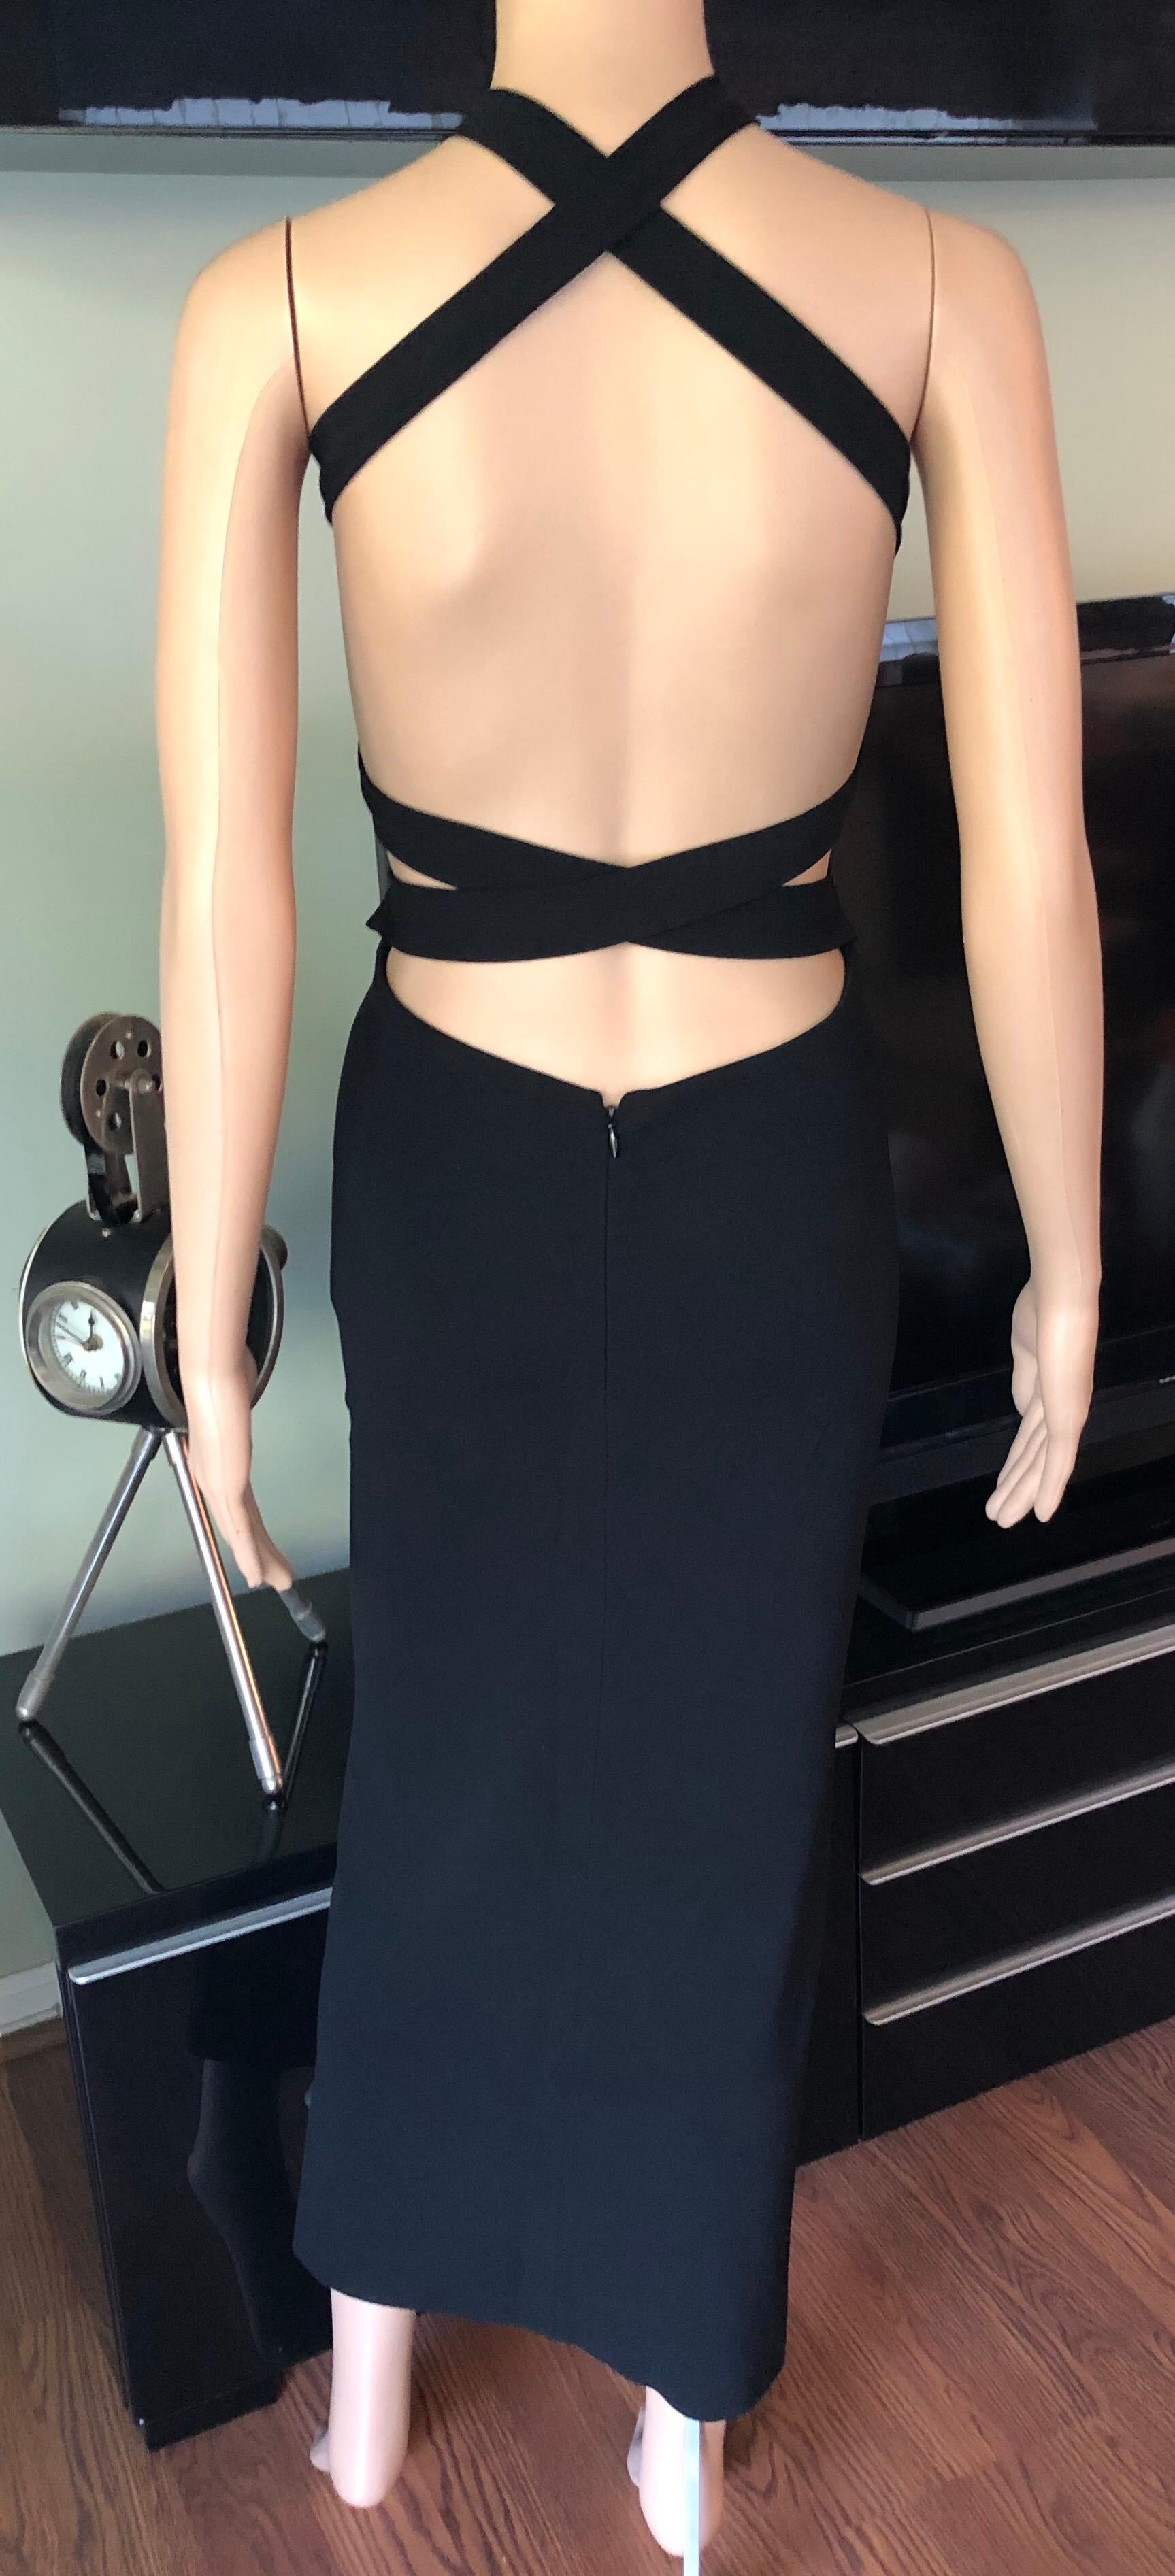 Dolce & Gabbana S/S 2001 Runway Backless Neck Tie Bodycon Black Dress IT 44

Please note this listing is for the exact dress Kylie wore in the black color. Also, please note the Look 5 Runway version of the dress was worn with a bra and is a shorter